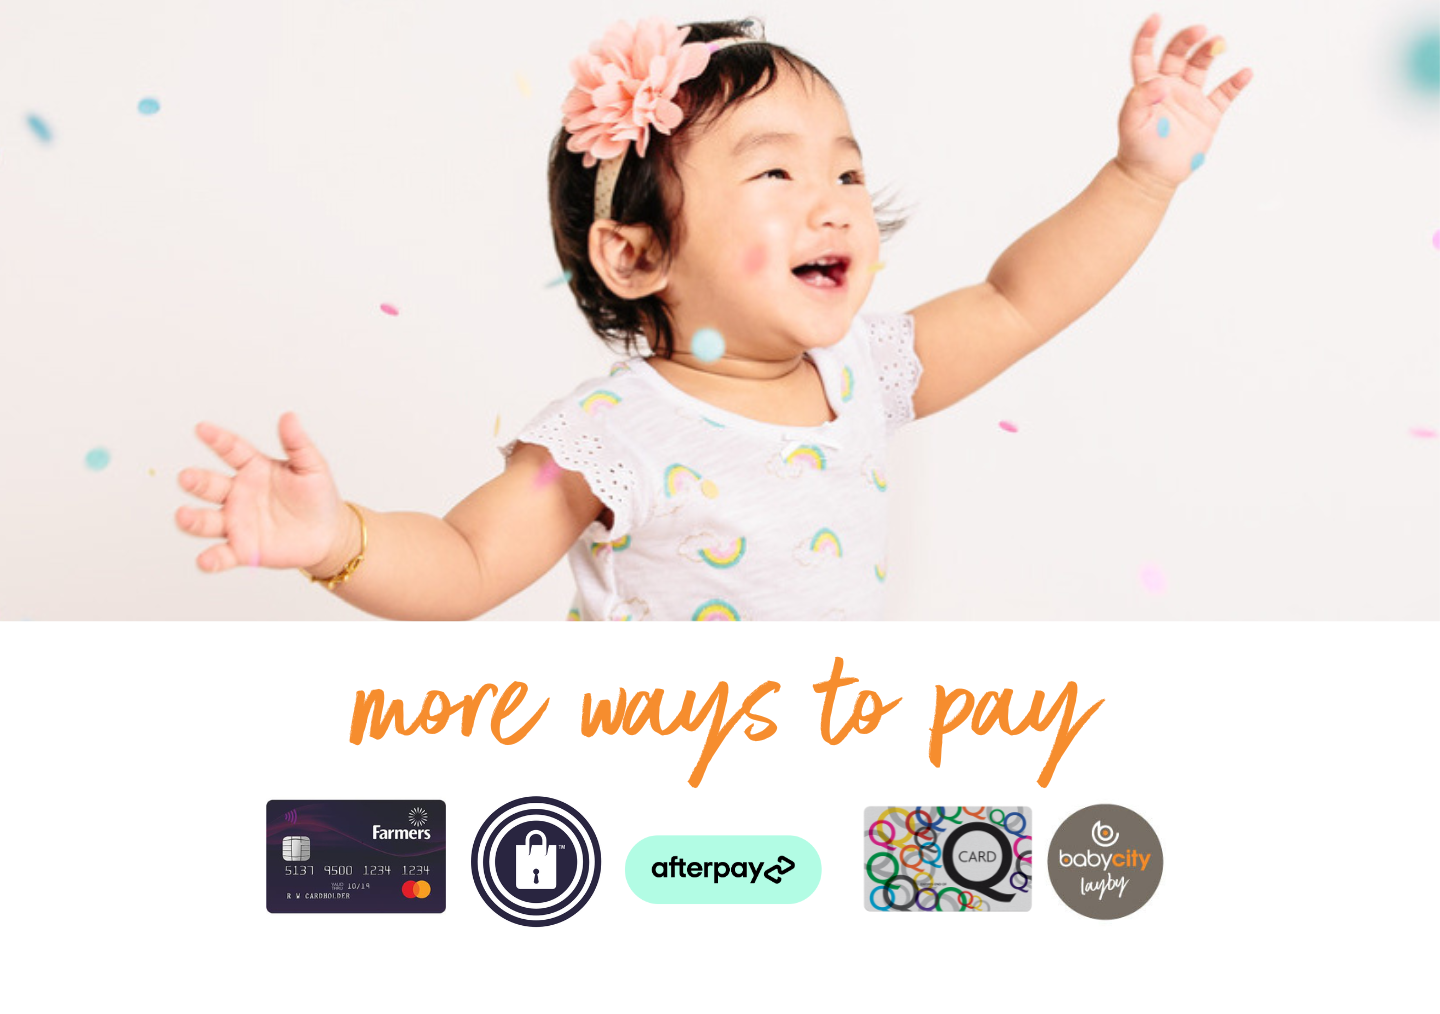 More ways to pay - Afterpay, Q Card and layby all accepted